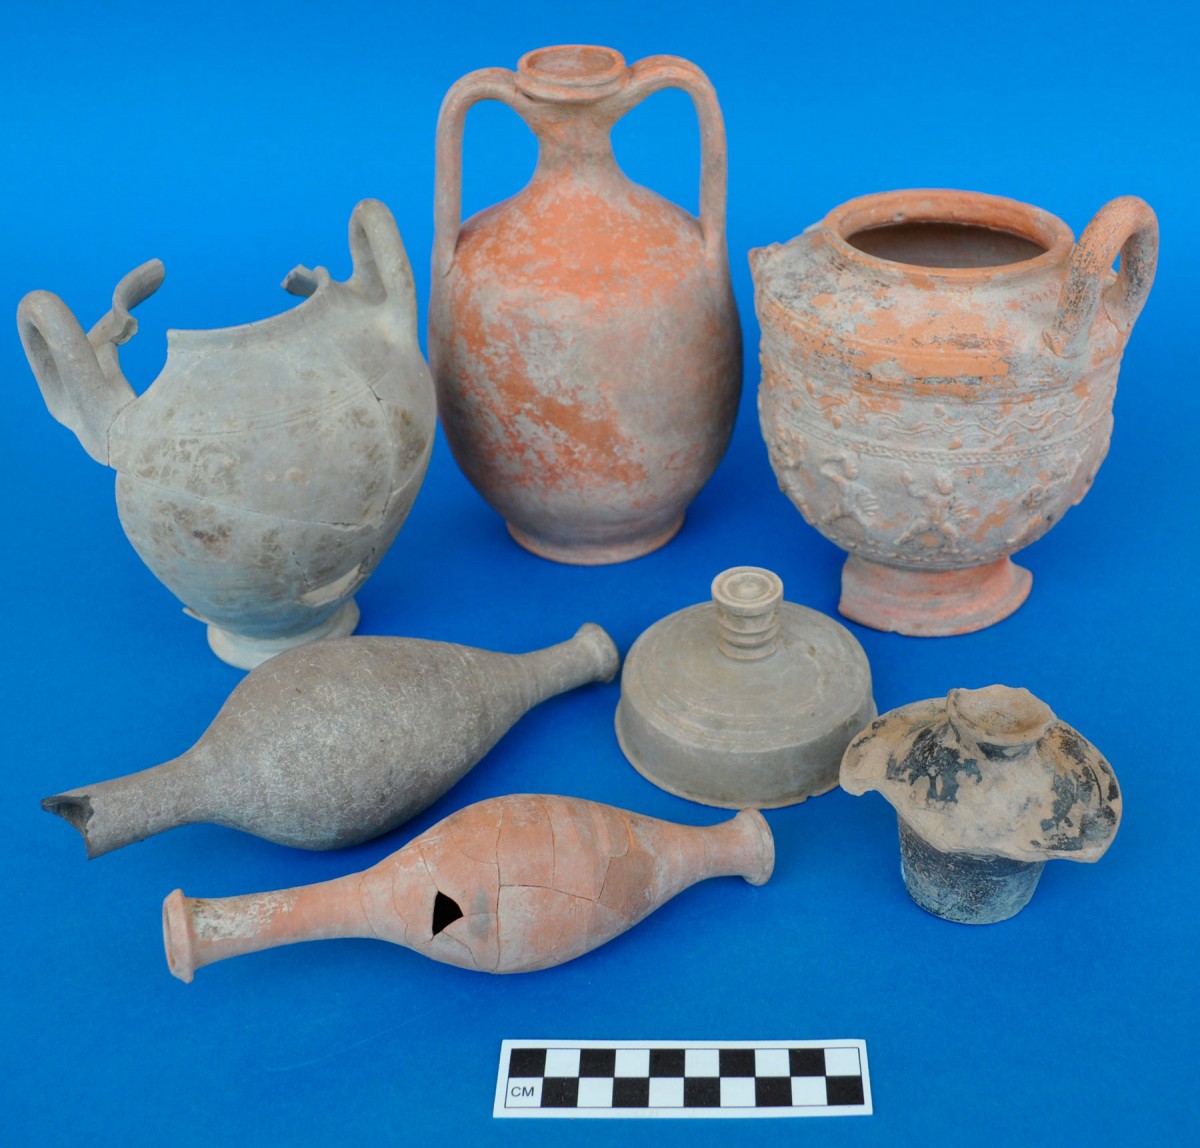 Fig. 6. Agia Varvara Servia, vessels of Hellenistic times-grave offerings from an eroded burial.